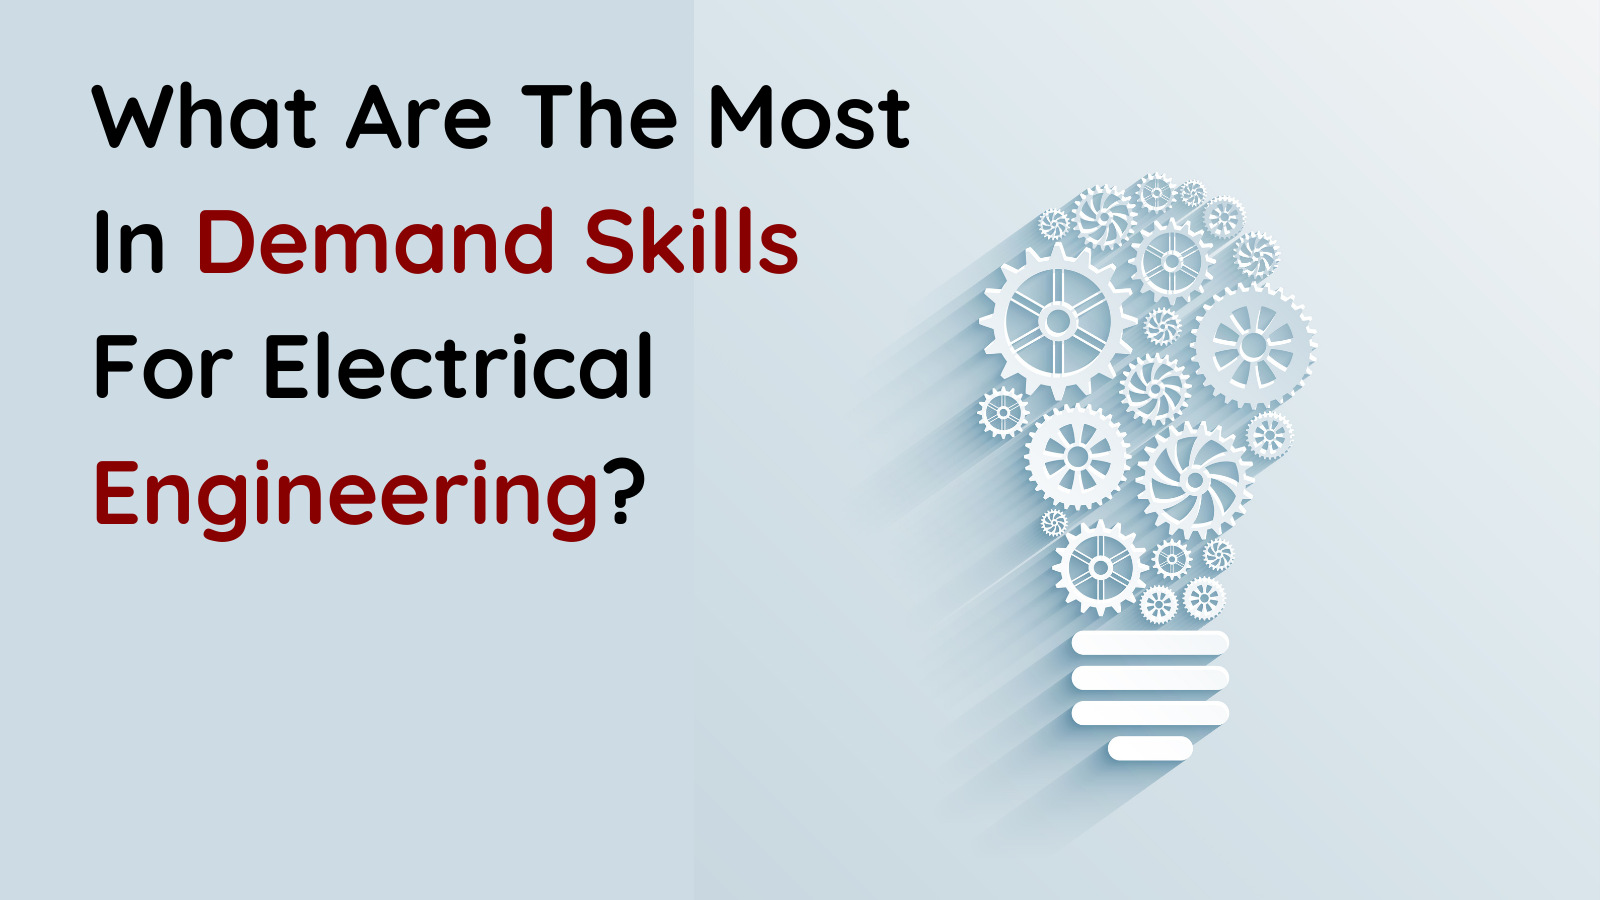 What Are The Demanding Skills For Electrical Engineering?